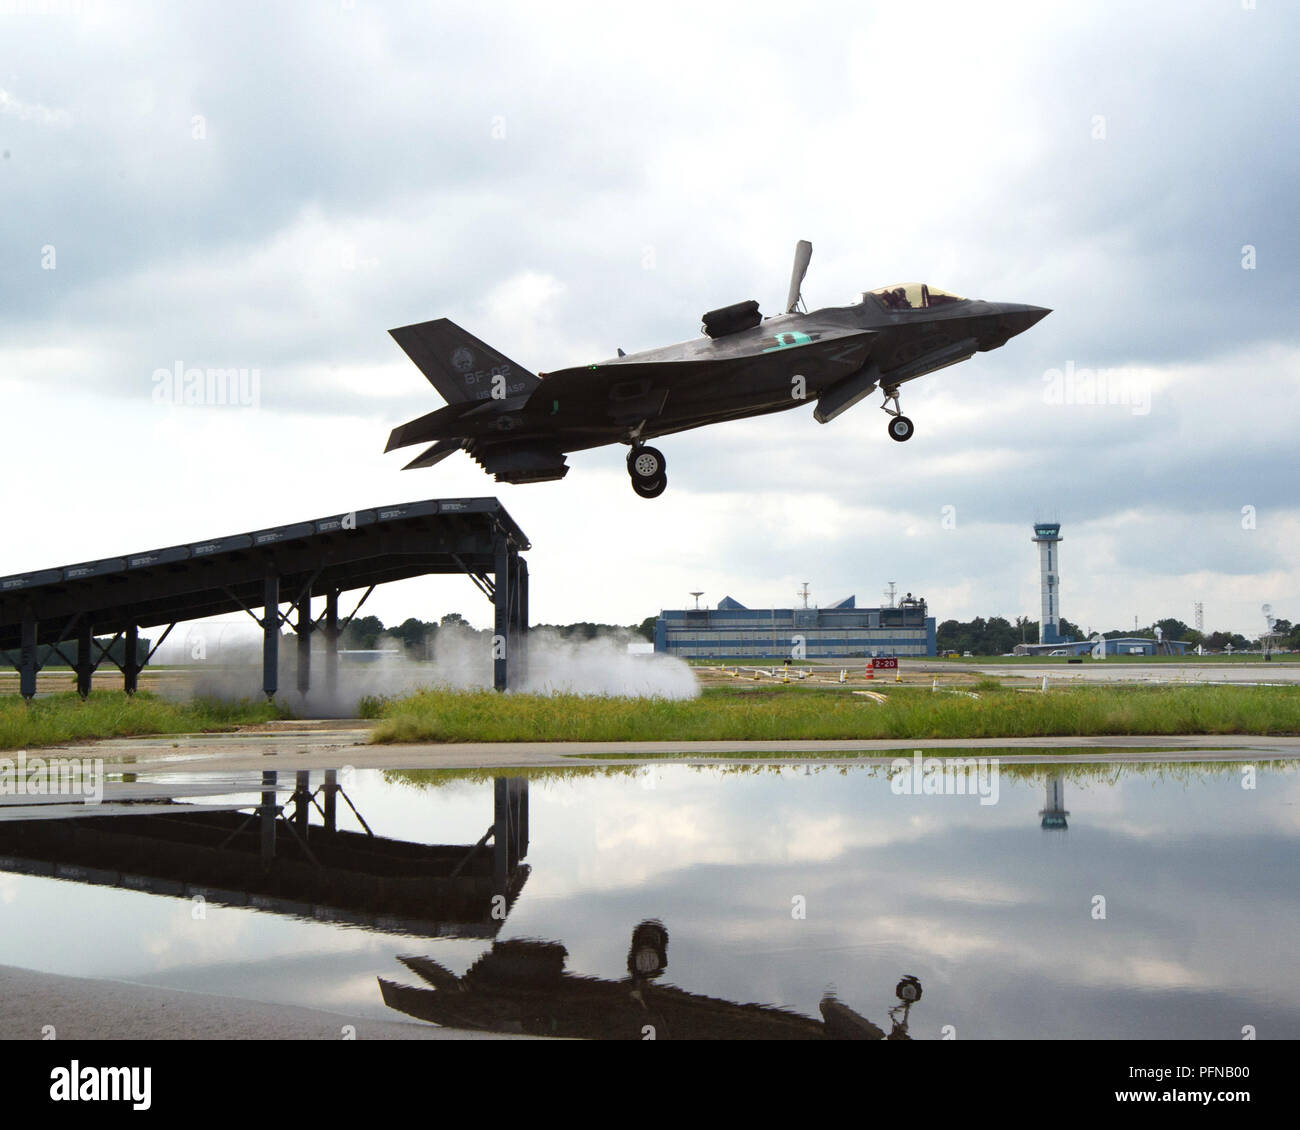 Royal Air Force Sqn Ldr Andrew 'Gary' Edgell, test pilot at the F-35 Pax River Integrated Test Force, performs a ski jump Aug. 13, 2018, at NAS Patuxent River with an F-35B test jet as part of the workups to prepare for First of Class Flying Trials (Fixed Wing) aboard HMS Queen Elizabeth.  Around 200 supporting staff from the ITF, including pilots, engineers, maintainers and data analysts, will take two F-35Bs test aircraft aboard the Royal Navy’s newest aircraft carrier this fall and are expected to conduct 500 take offs and landings during their 11-week test period at sea. This fixed wing te Stock Photo